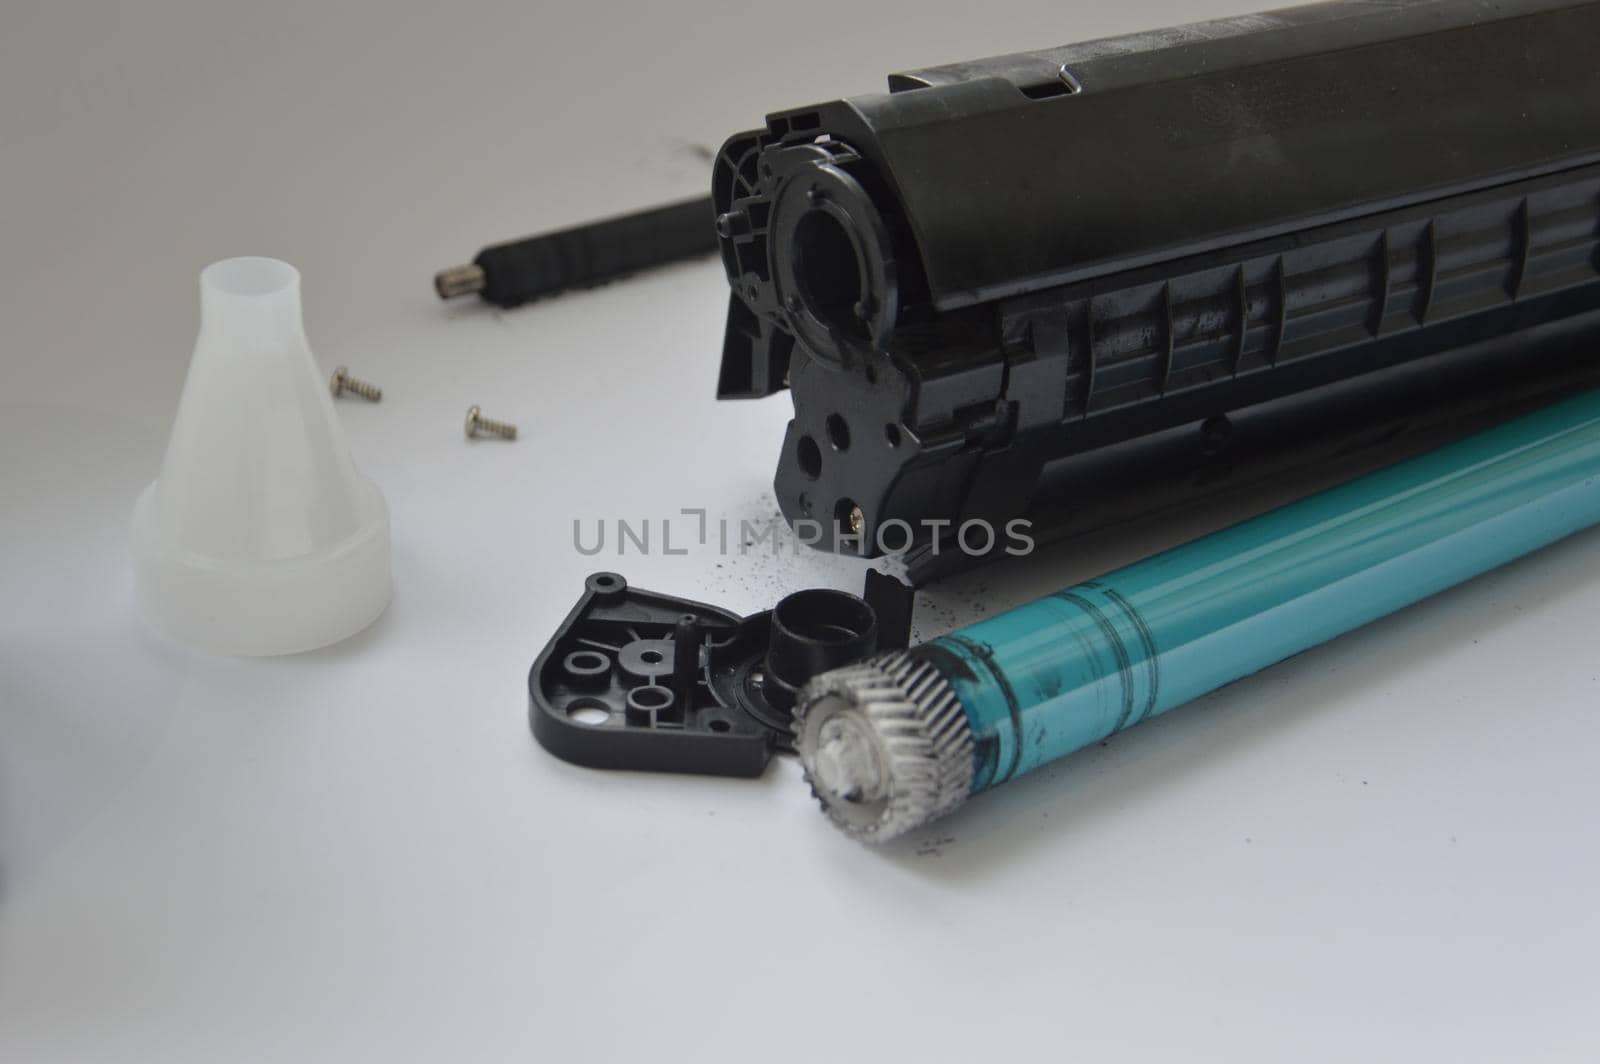 Charging the laser printer cartridge with toner powder by architectphd